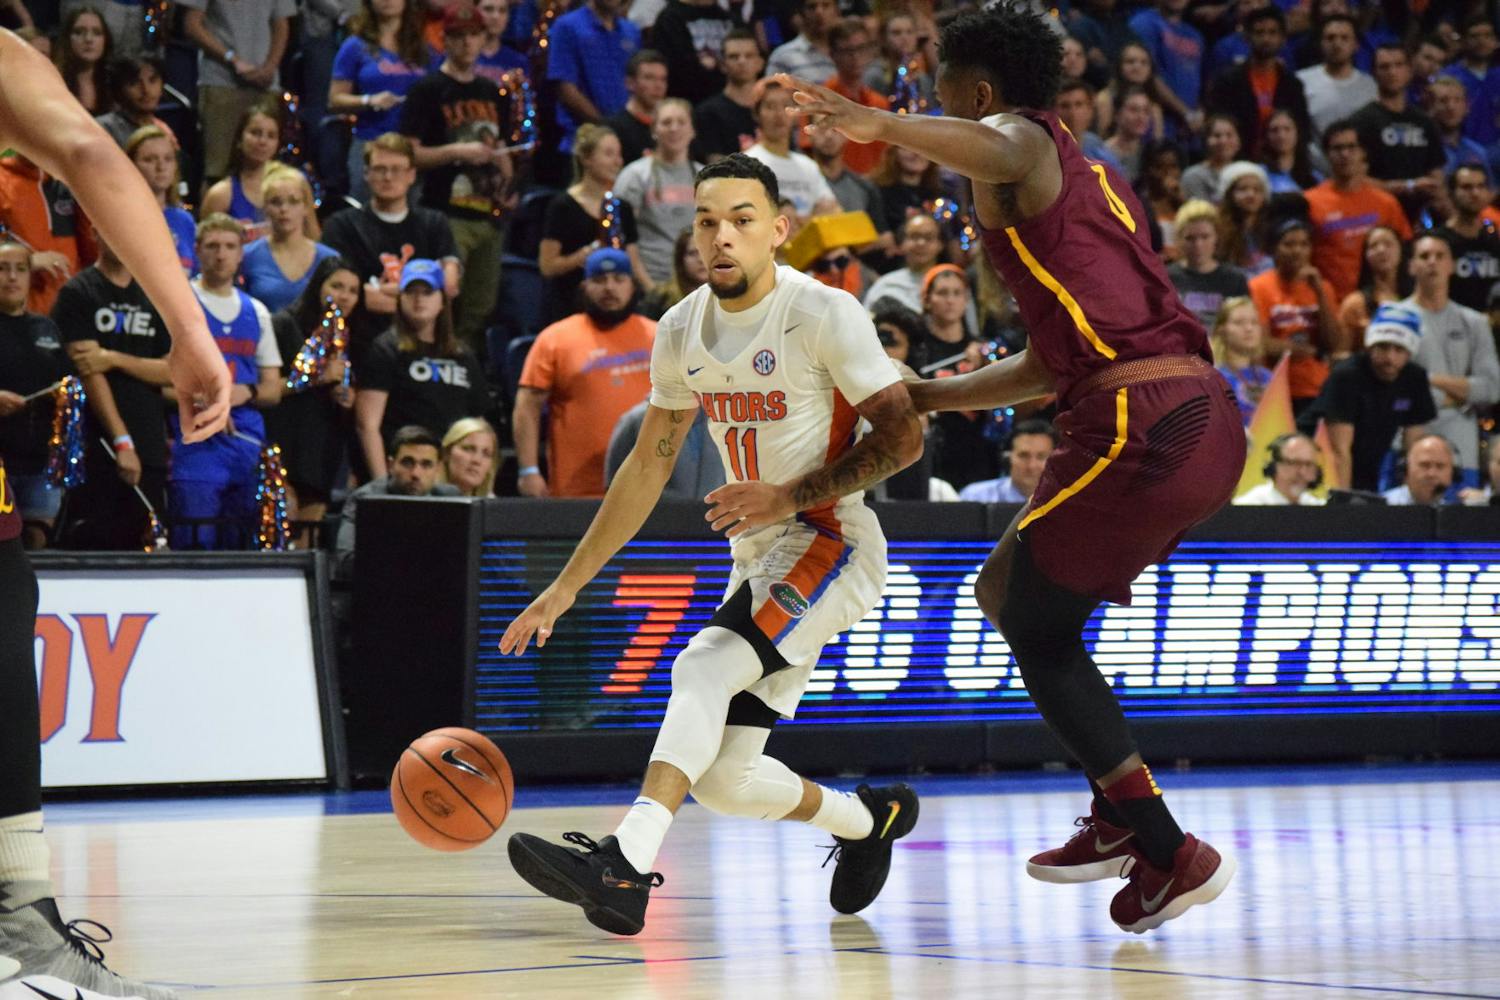 Florida guard Chris Chiozza recorded 16 points, four assists, four steals and no turnovers on Friday in UF's 75-60 win over Incarnate Word at the O'Connell Center.